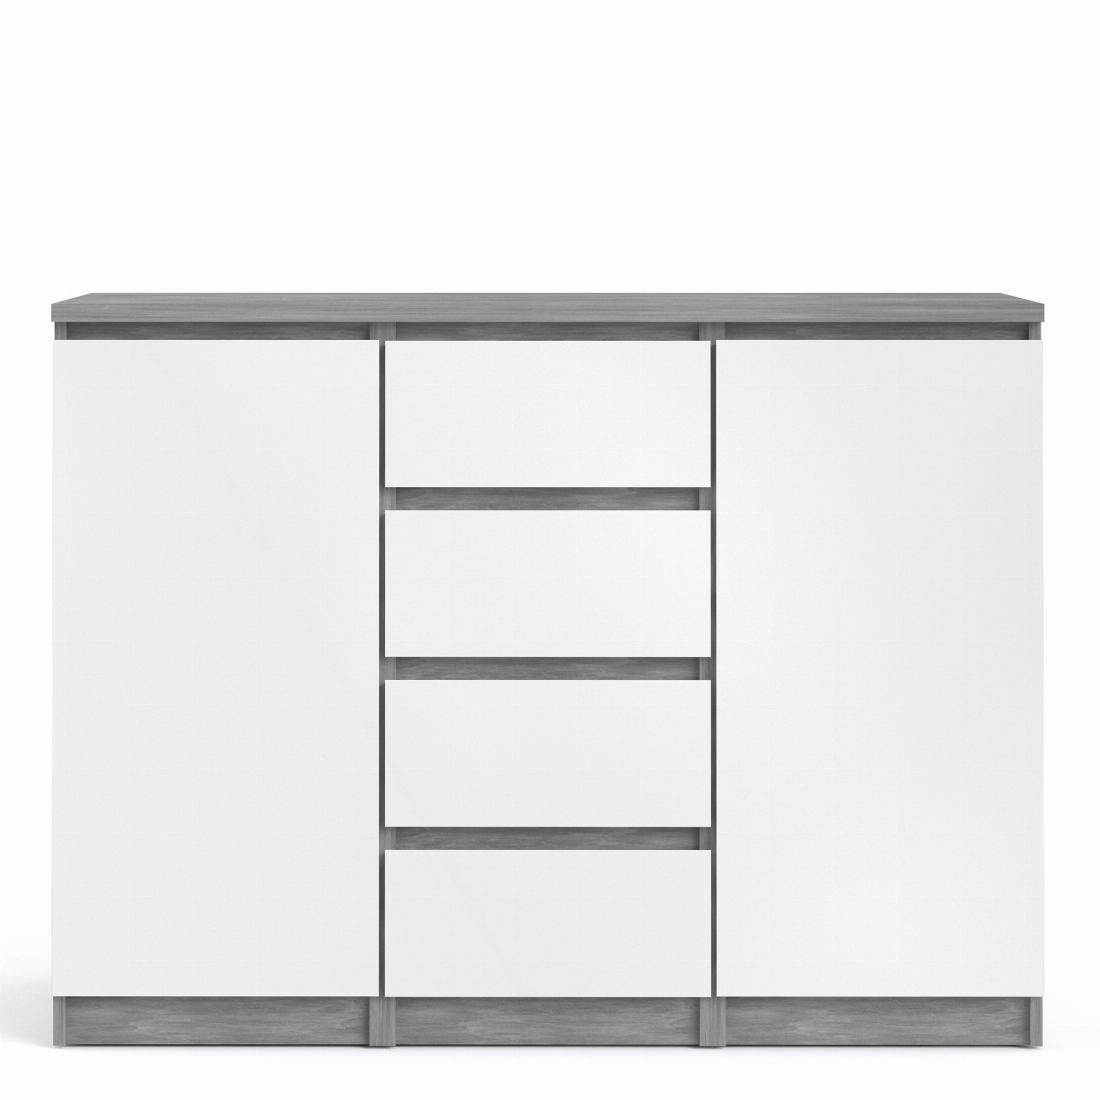 Naia Sideboard - 4 Drawers 2 Doors in Concrete and White High Gloss